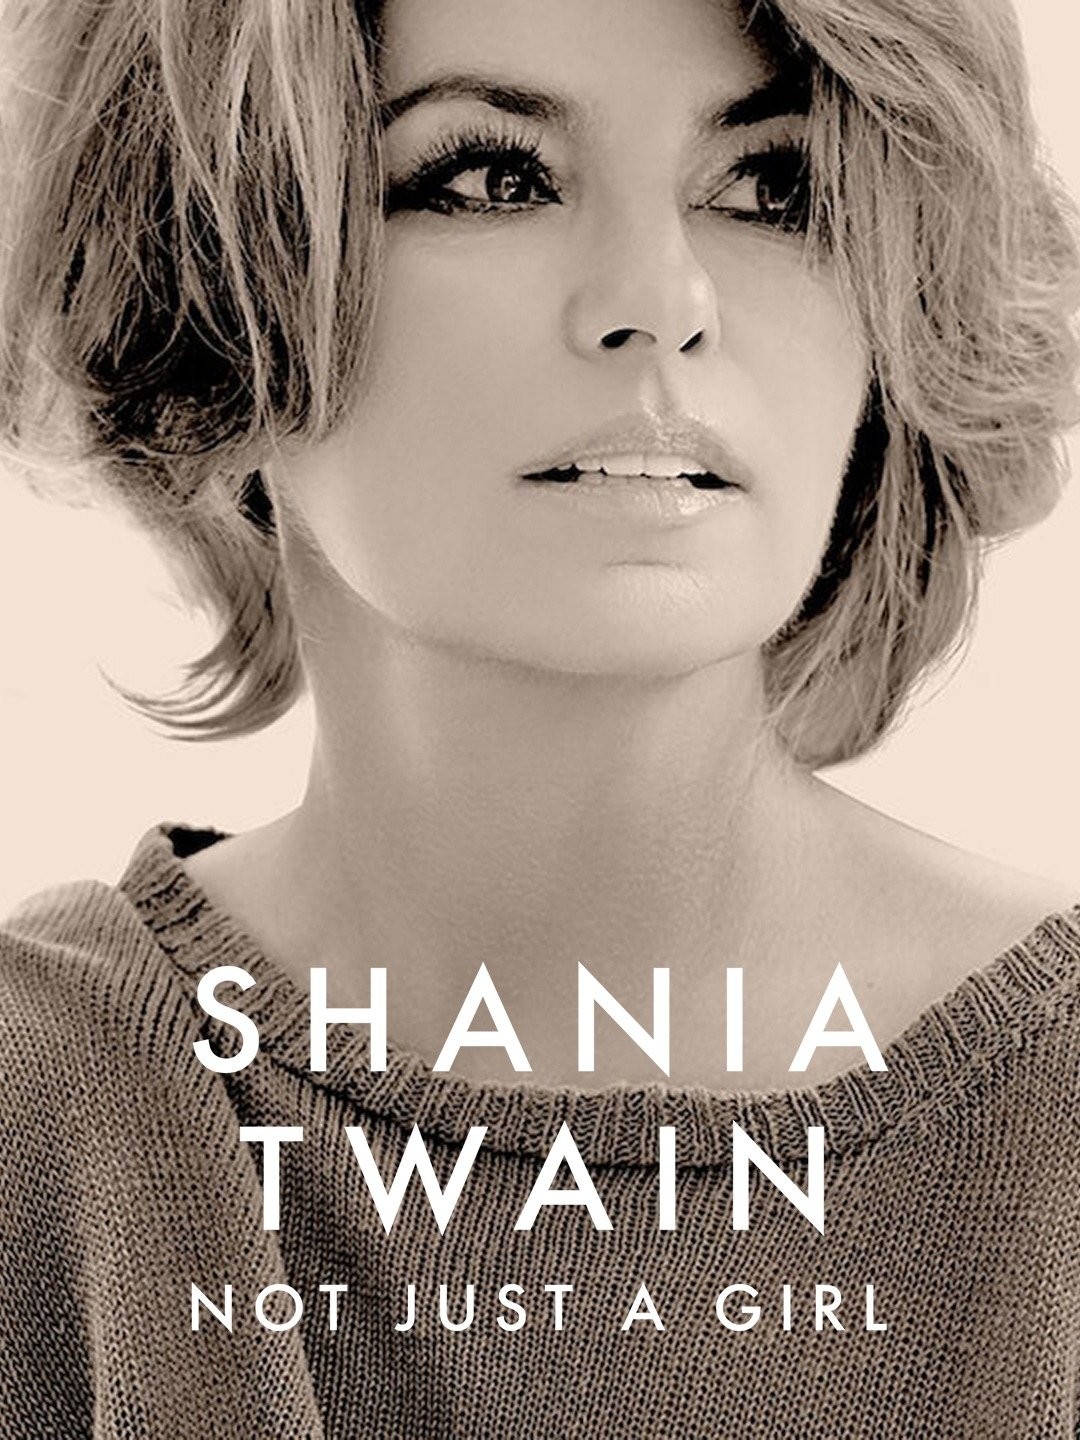 Promotional poster for "Shania Twain: Not Just a Girl."